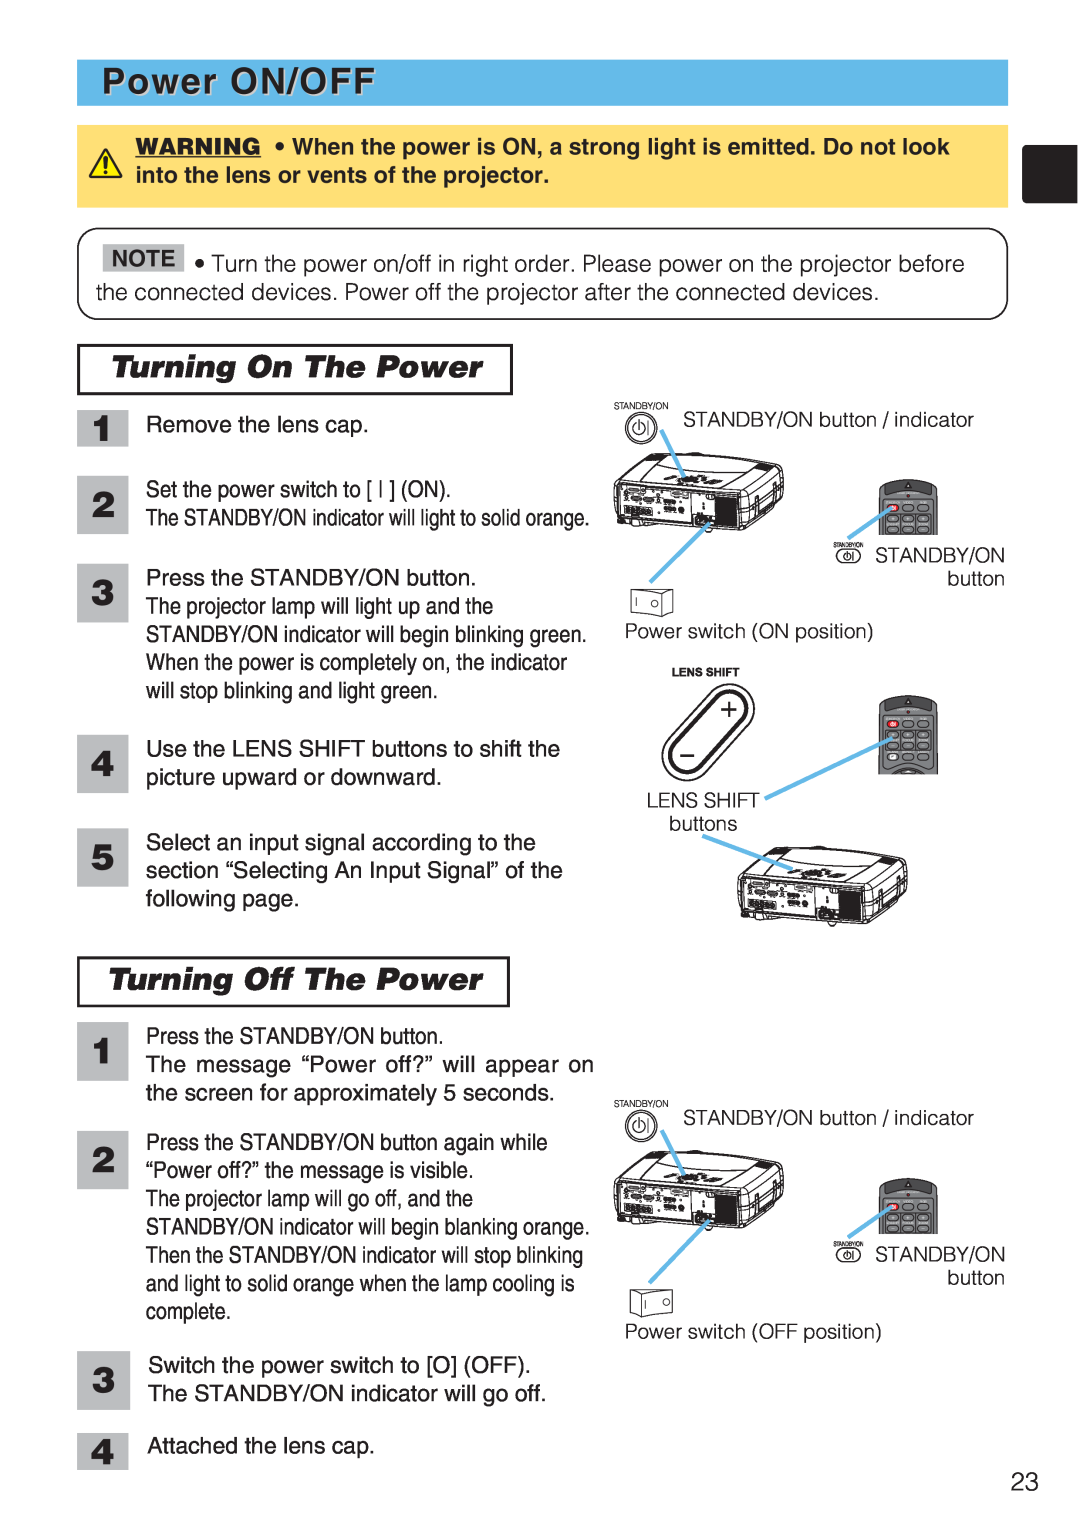 Toshiba TLP-SX3500 user manual Power ON/OFF, Turning On The Power, Turning Off The Power 